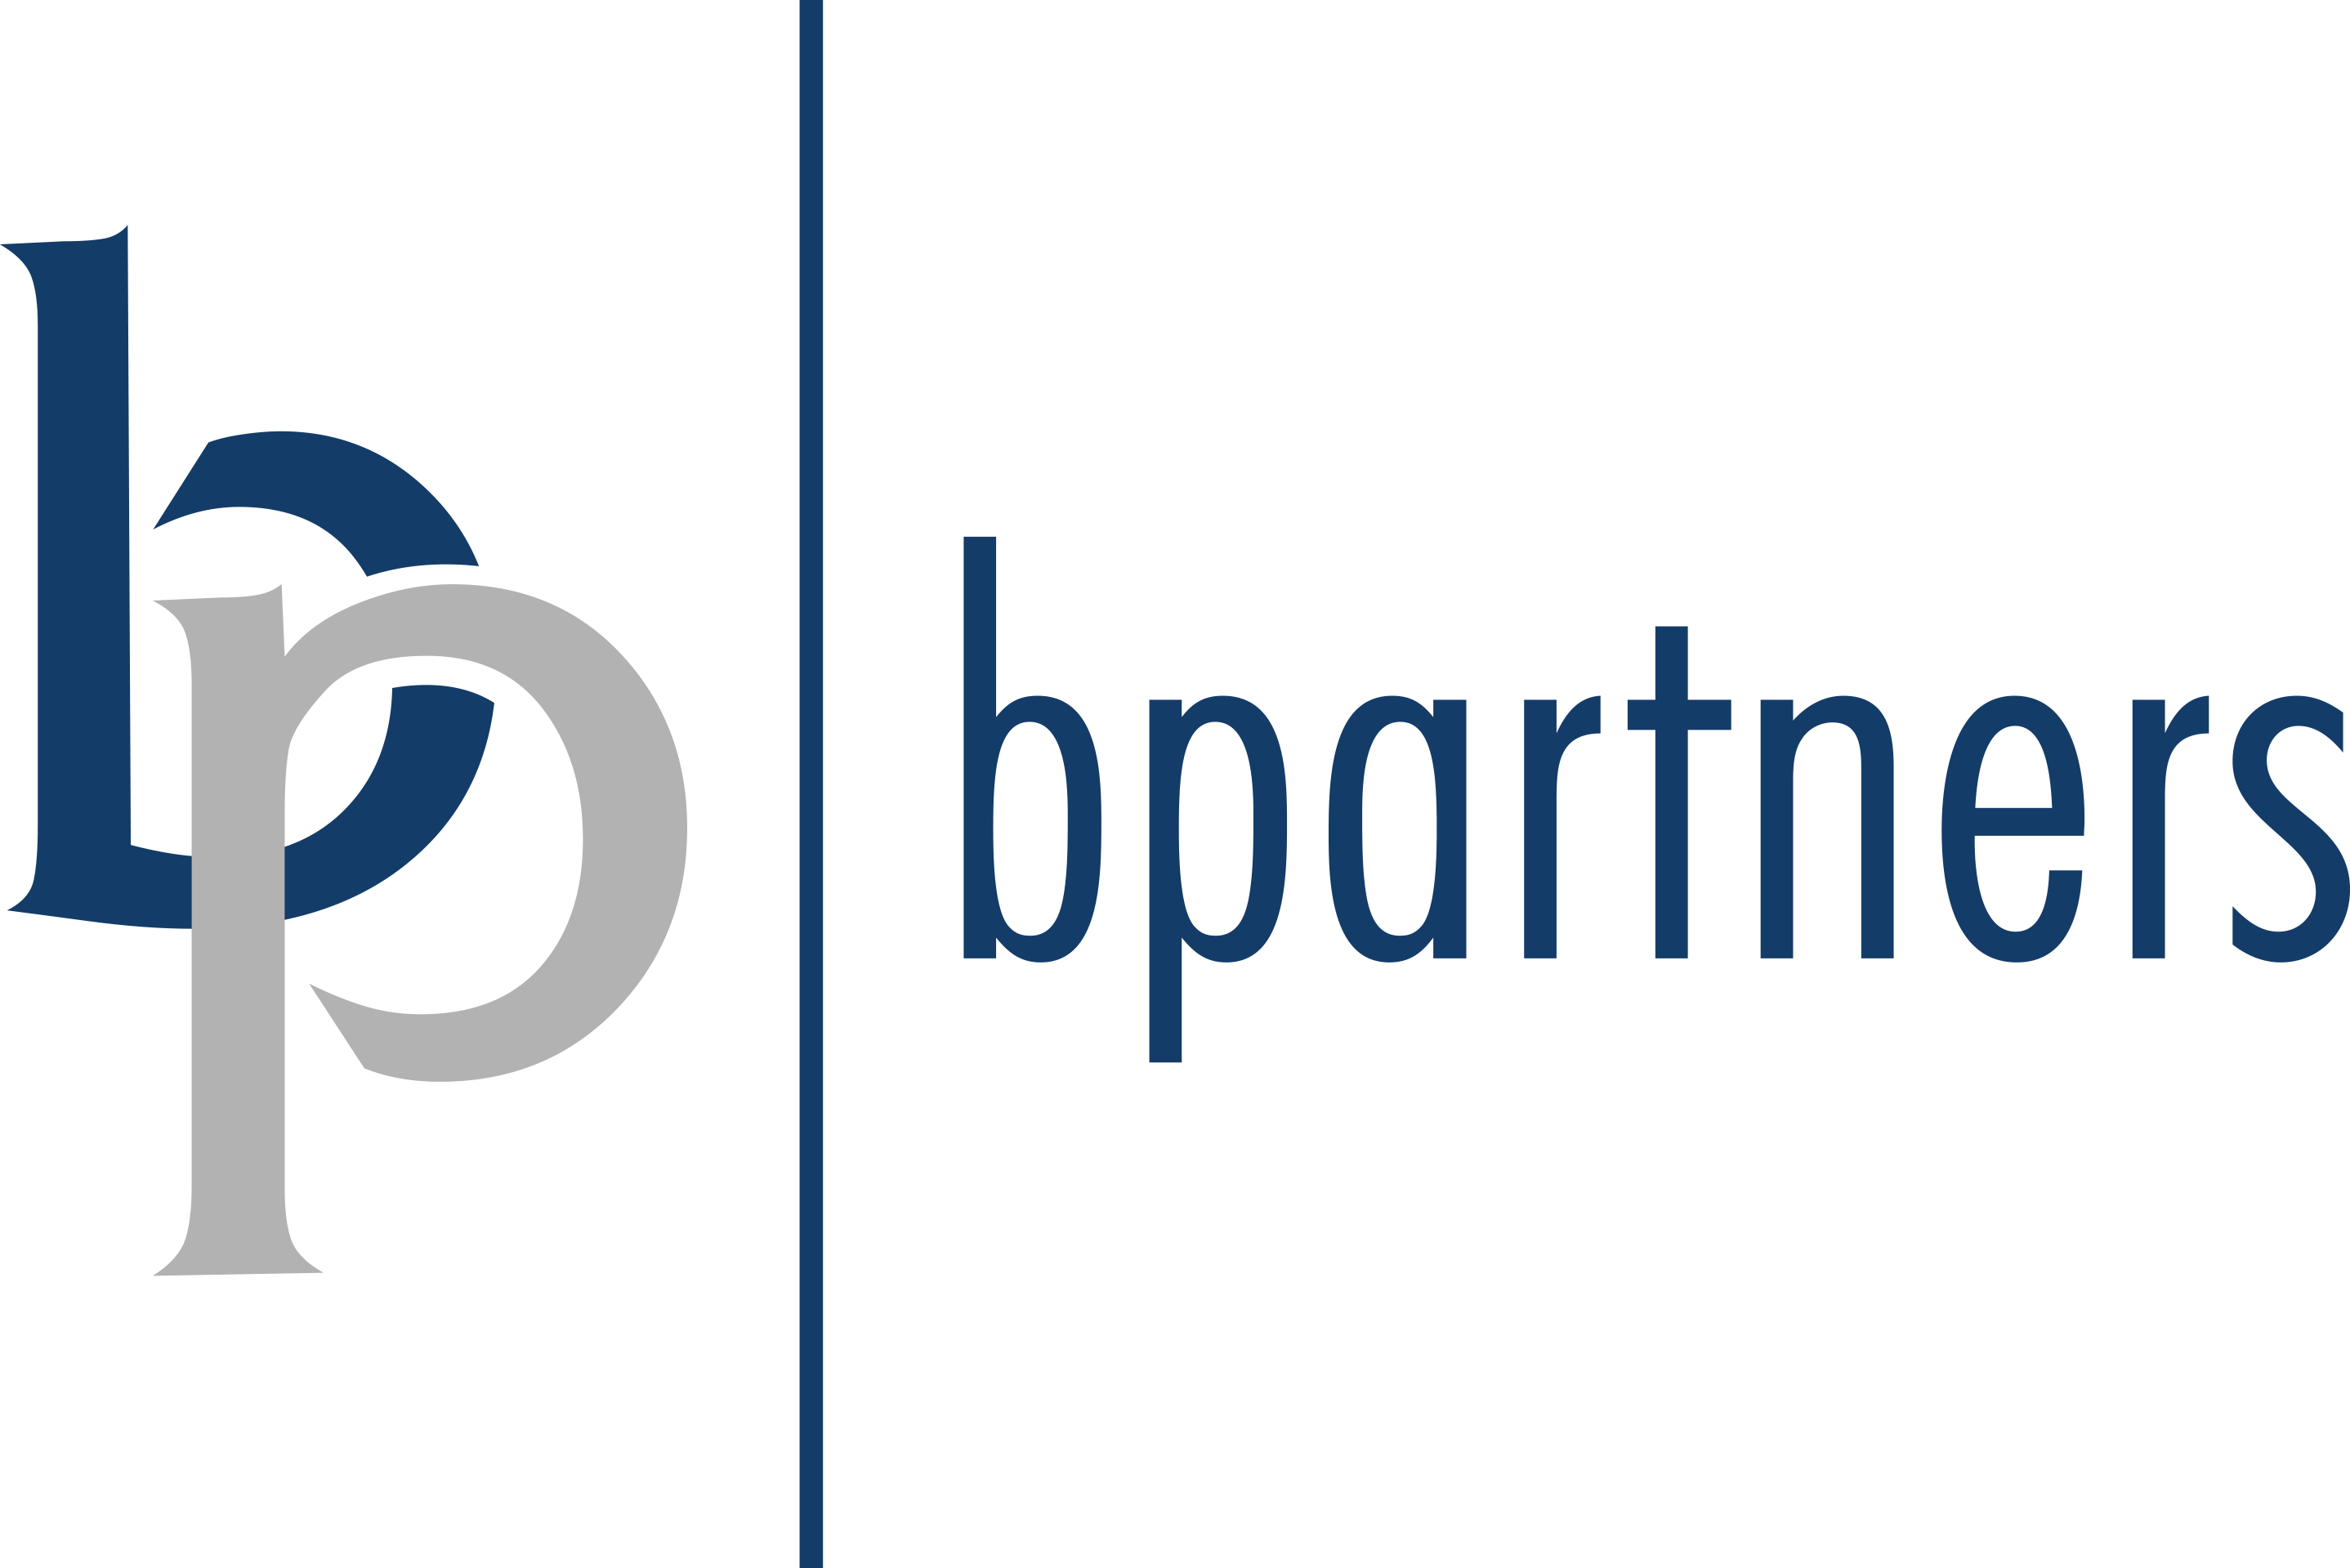 BPartners Sponsoring, Digital & Events profile on Qualified.One